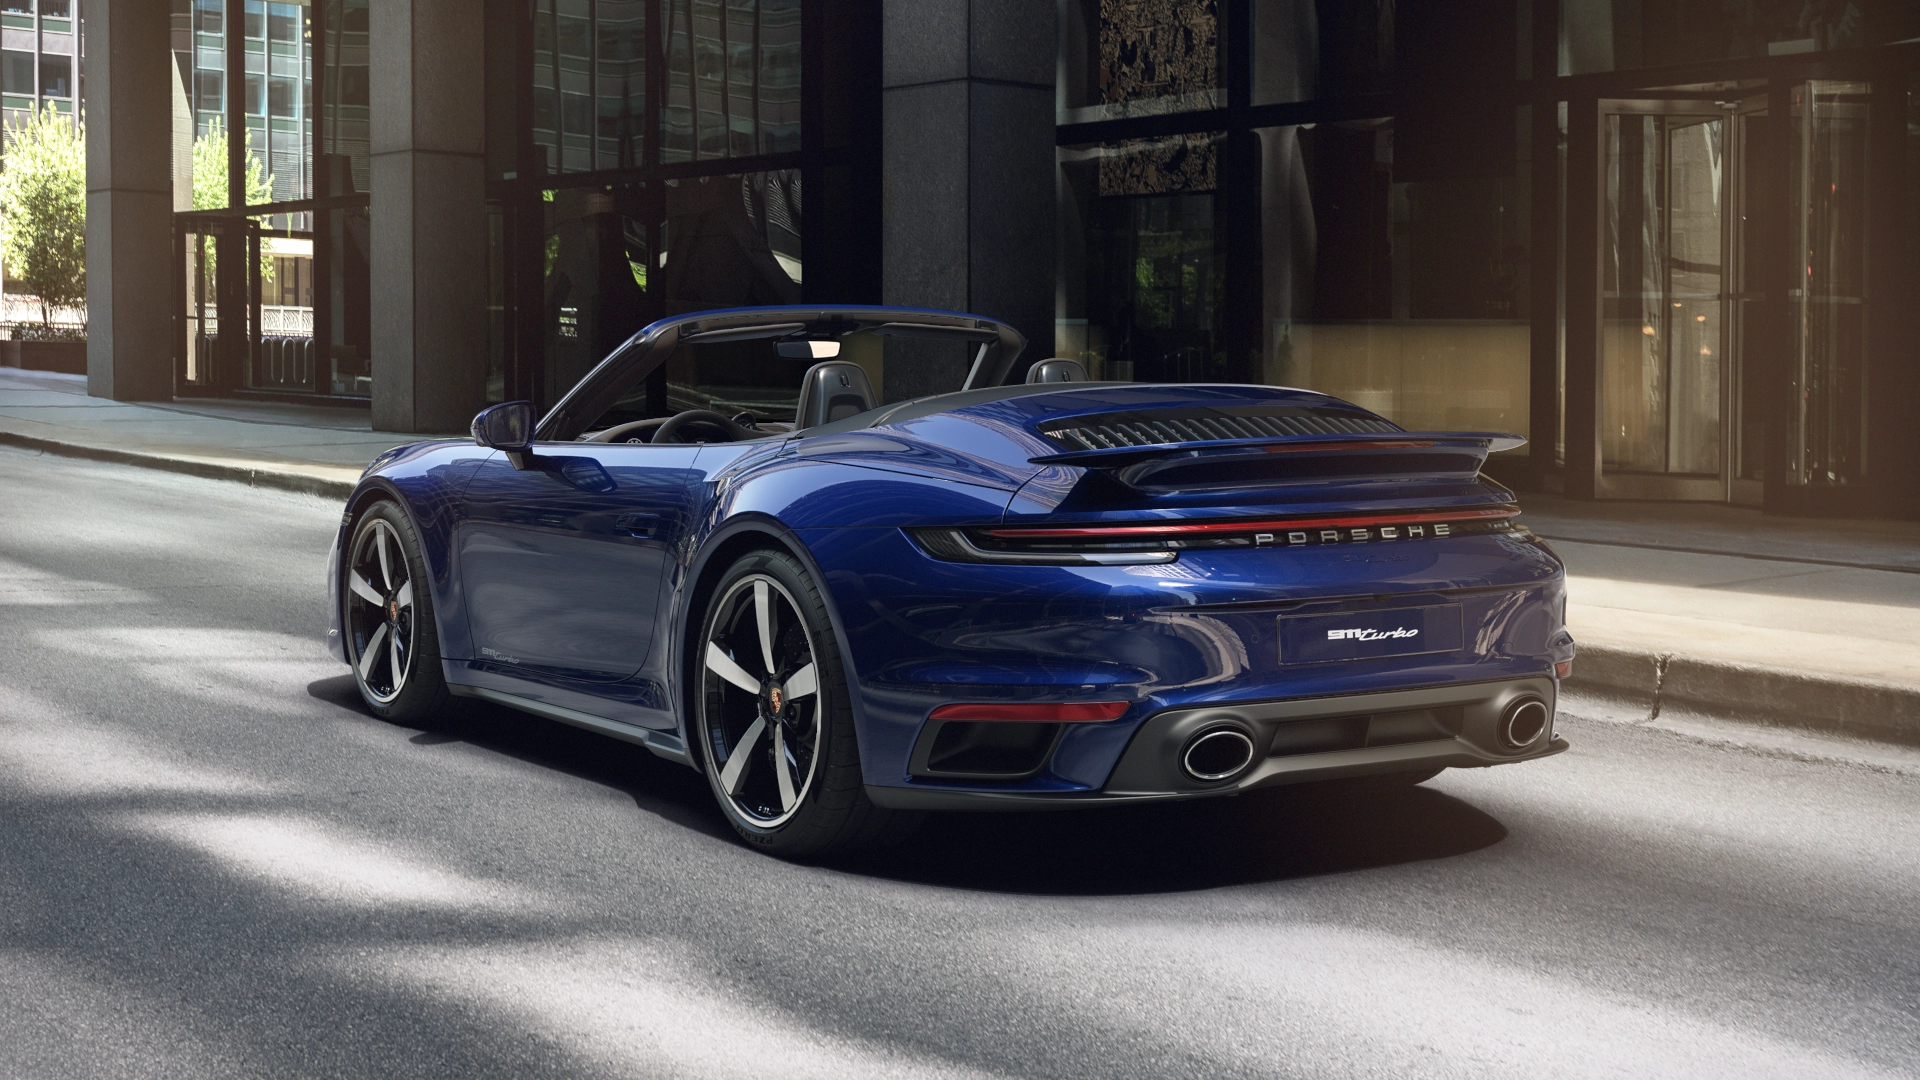 911 Turbo Cabriolet back view